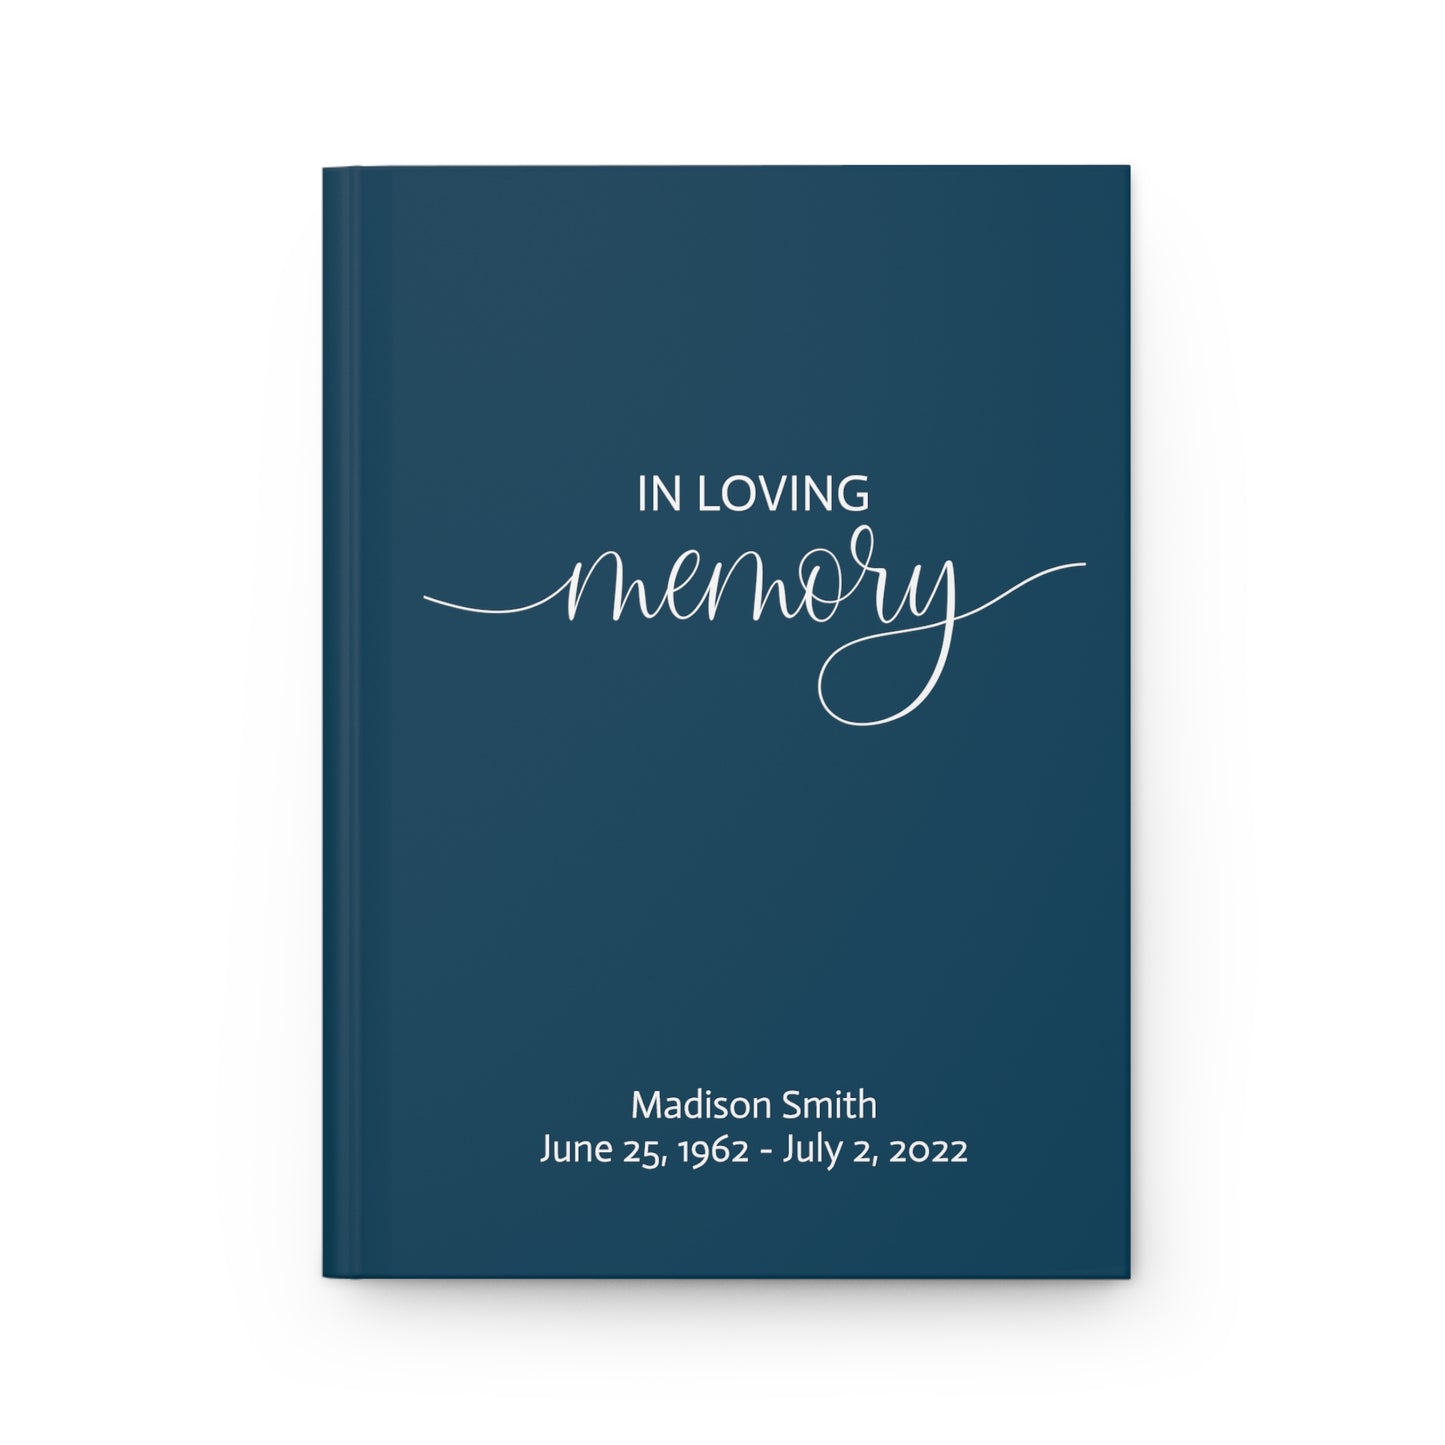 Funeral Guest Book, Memorial Book, Book to Sign, Sympathy Gift, Life Celebration, In Loving Memory, Funeral Registry, Memorial Guest Book